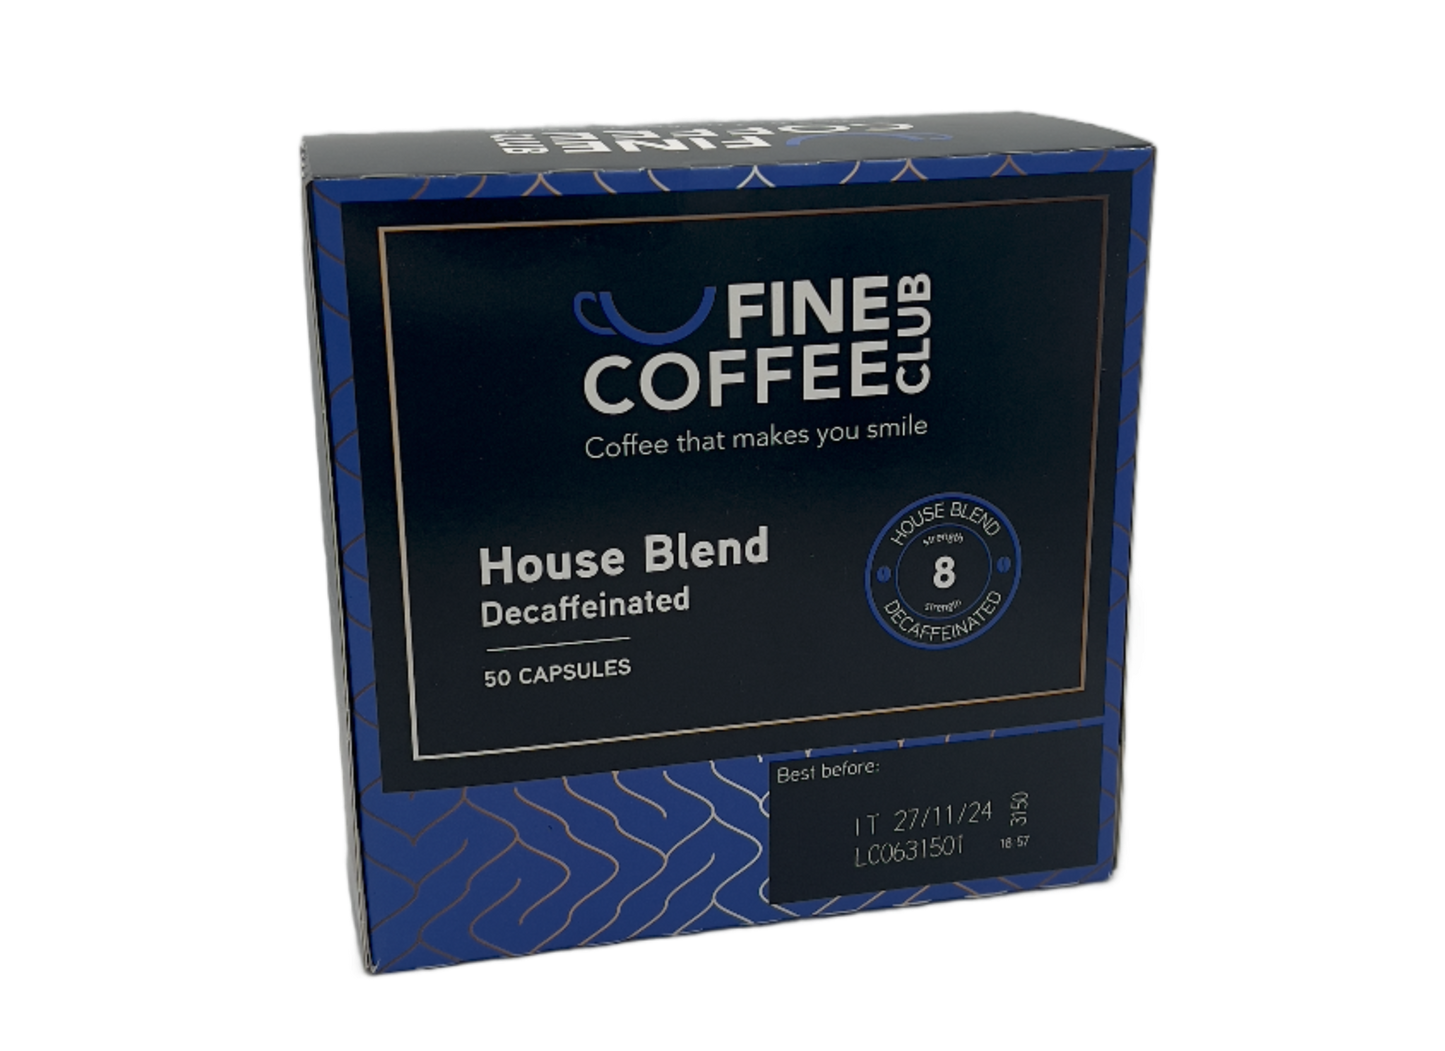 House Blend Decaffeinated (50 capsules)